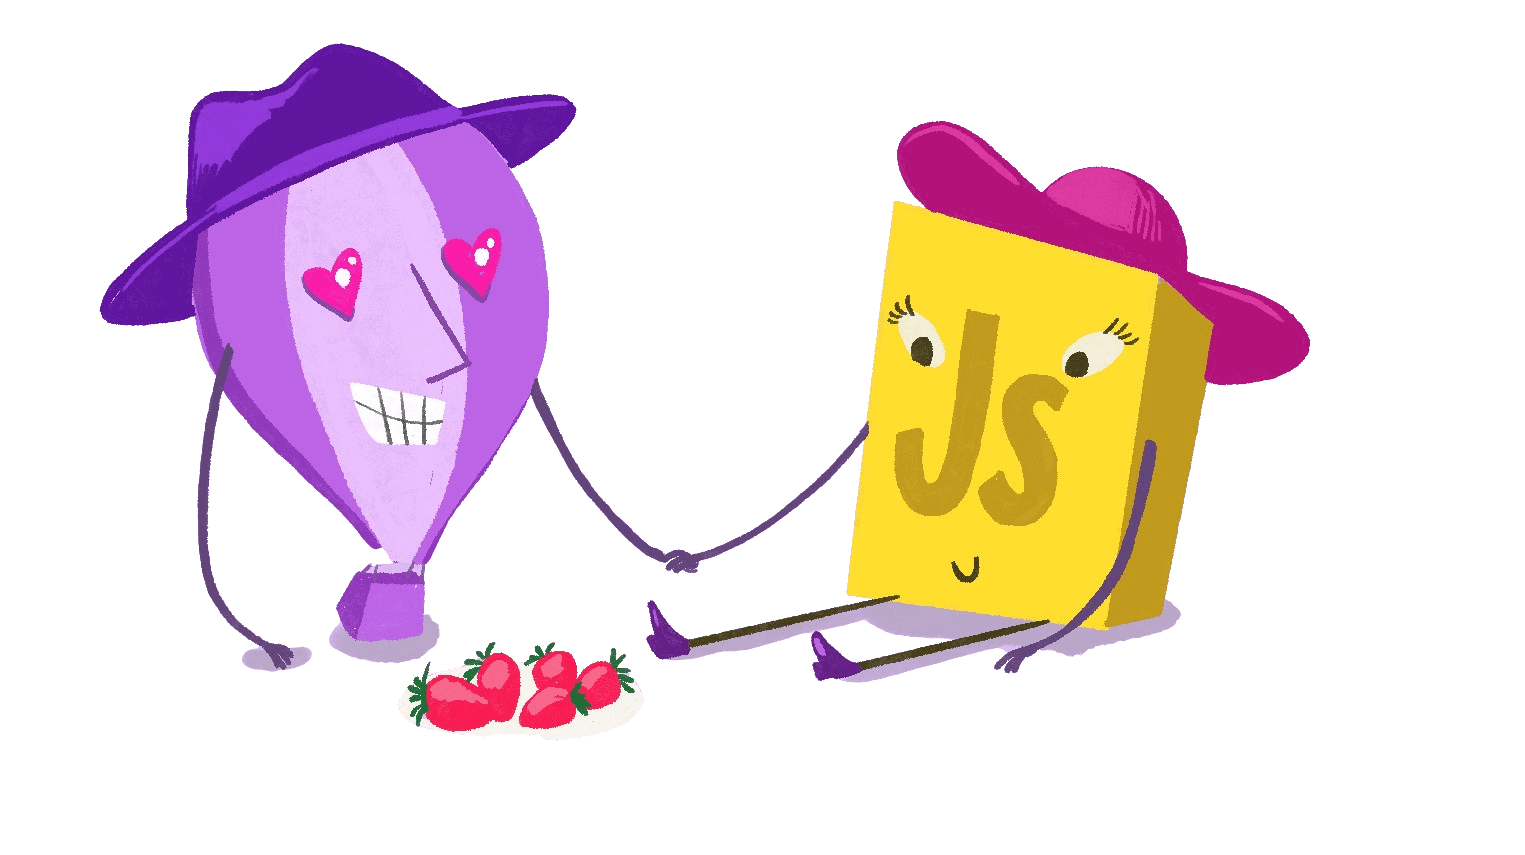 An illustration of Frankie the hot air balloon looking at the JavaScript logo in love.